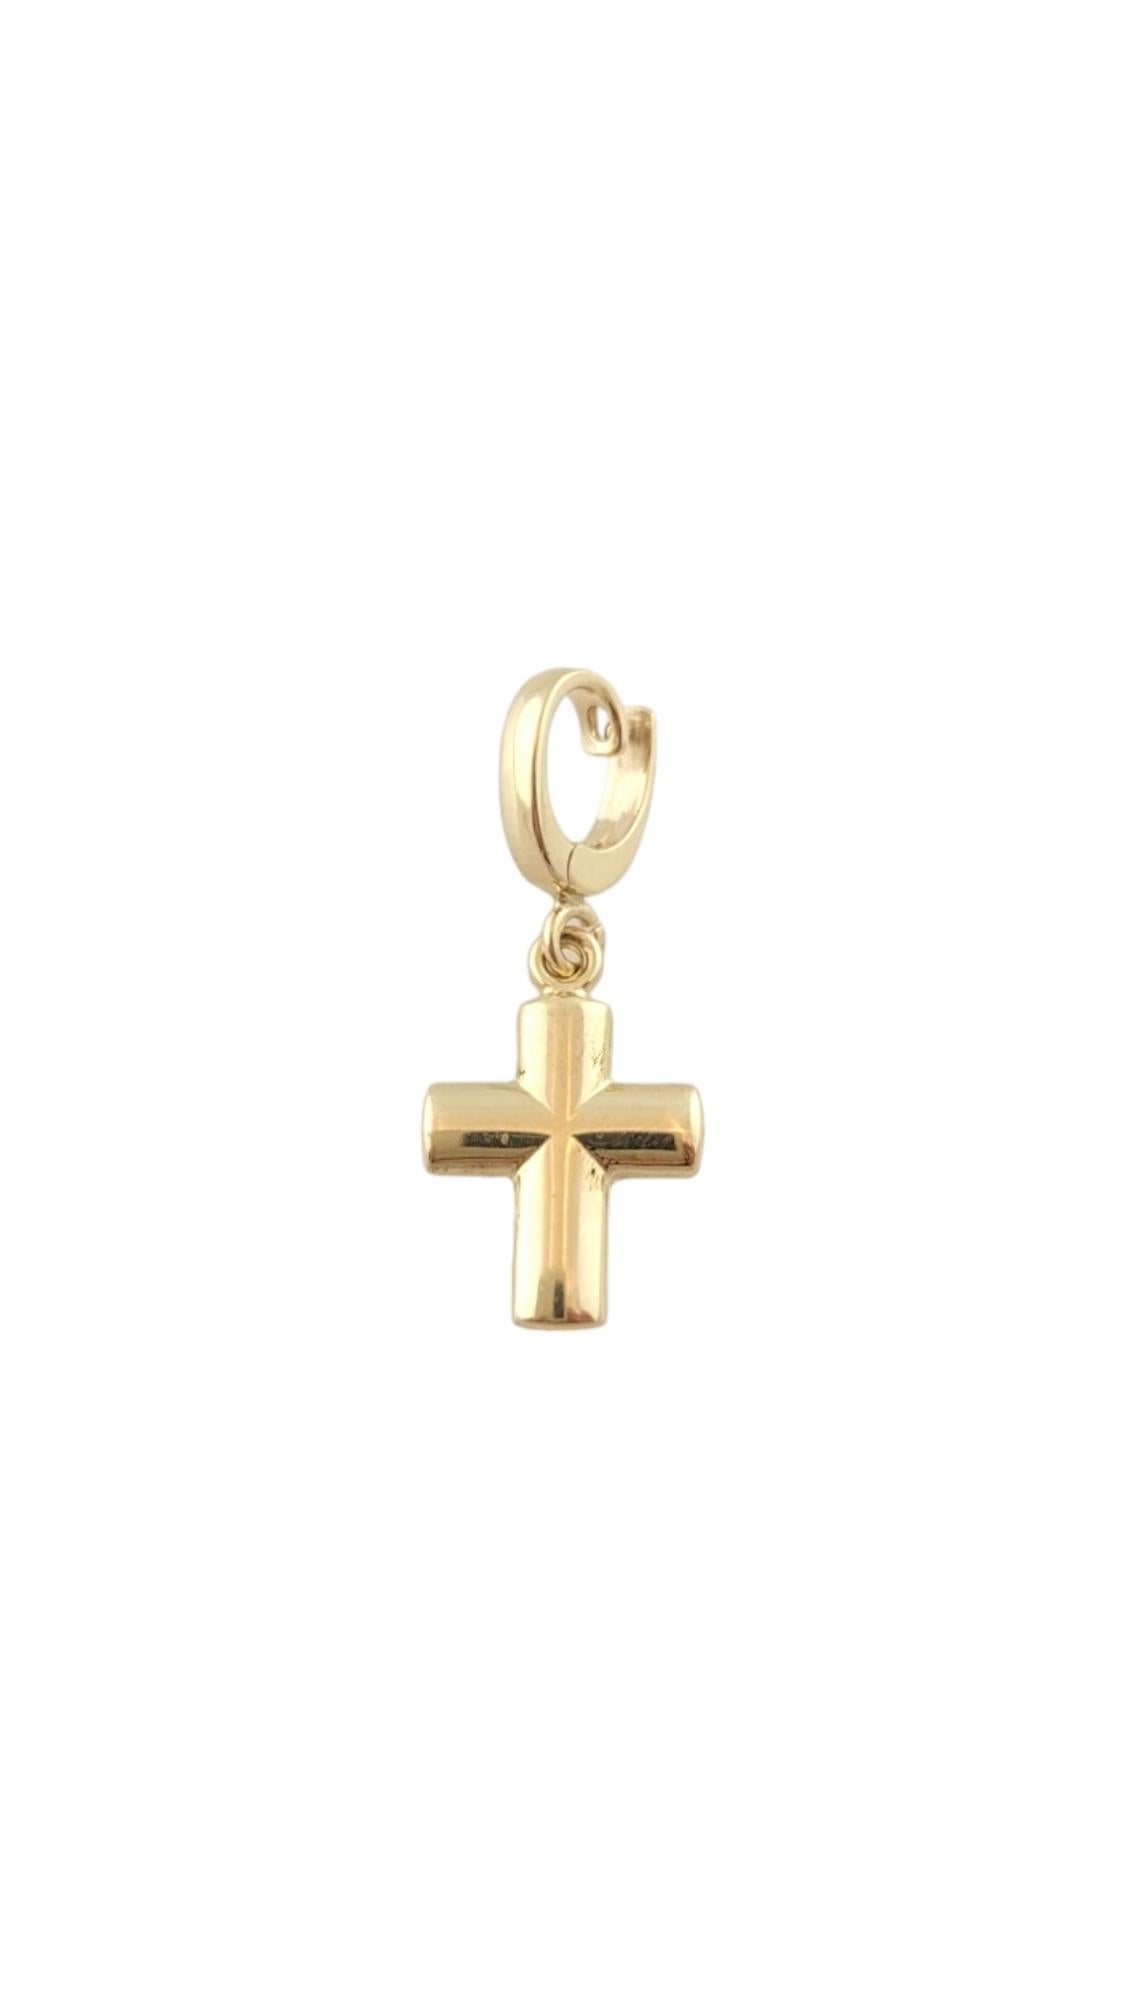 Vintage 14K Yellow Gold Cross Pendant -

This cross charm is a symbol of faith and adds a graceful touch to your jewelry collection. 

Size: 11.8mm X 10mm 

Weight: 0.8g/0.5dwt

Hallmark: 14K ITALY EG

*Chain not included*

Very good condition,